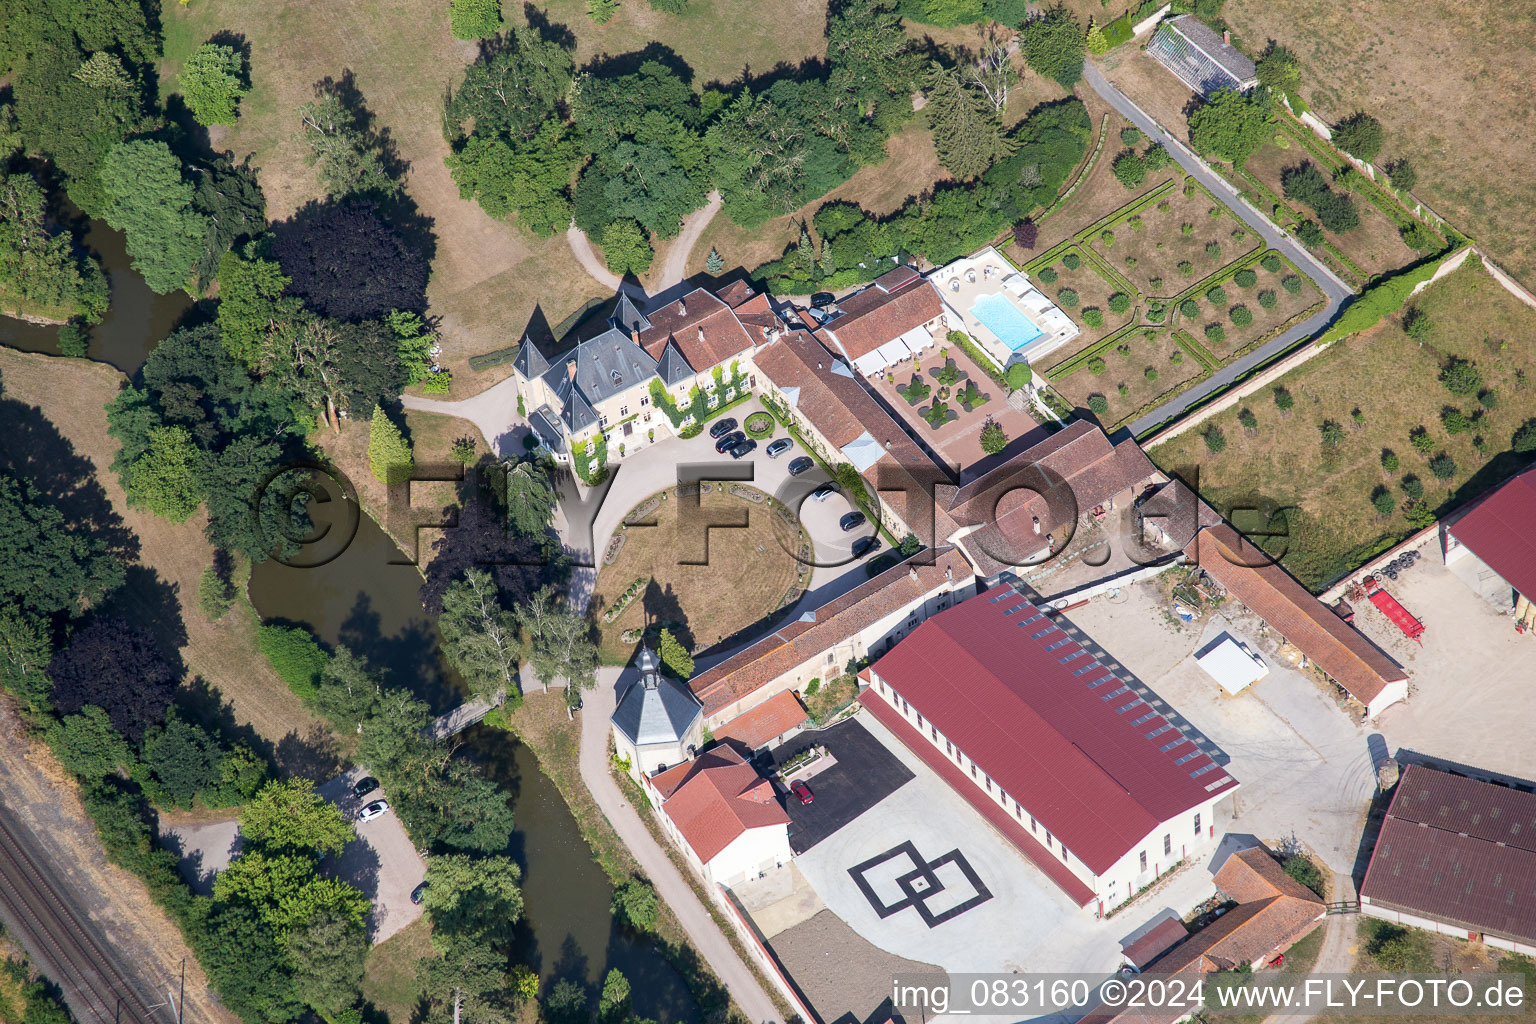 Aerial view of Palace Chateau d'Adomenil in Rehainviller in Grand Est, France